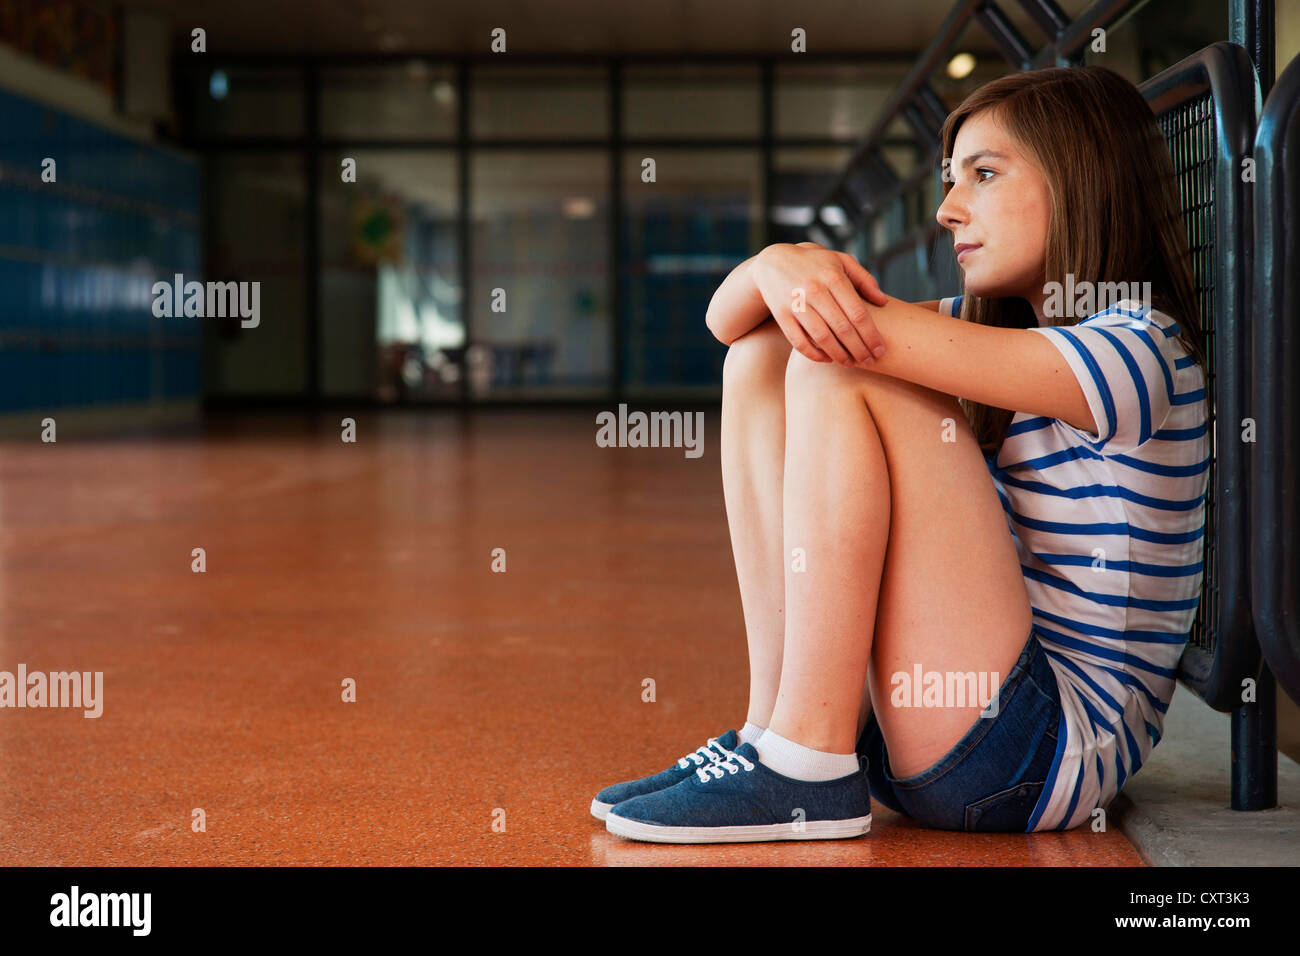 Schoolgirl sitting alone in the school building, leaning against a railing Stock Photo